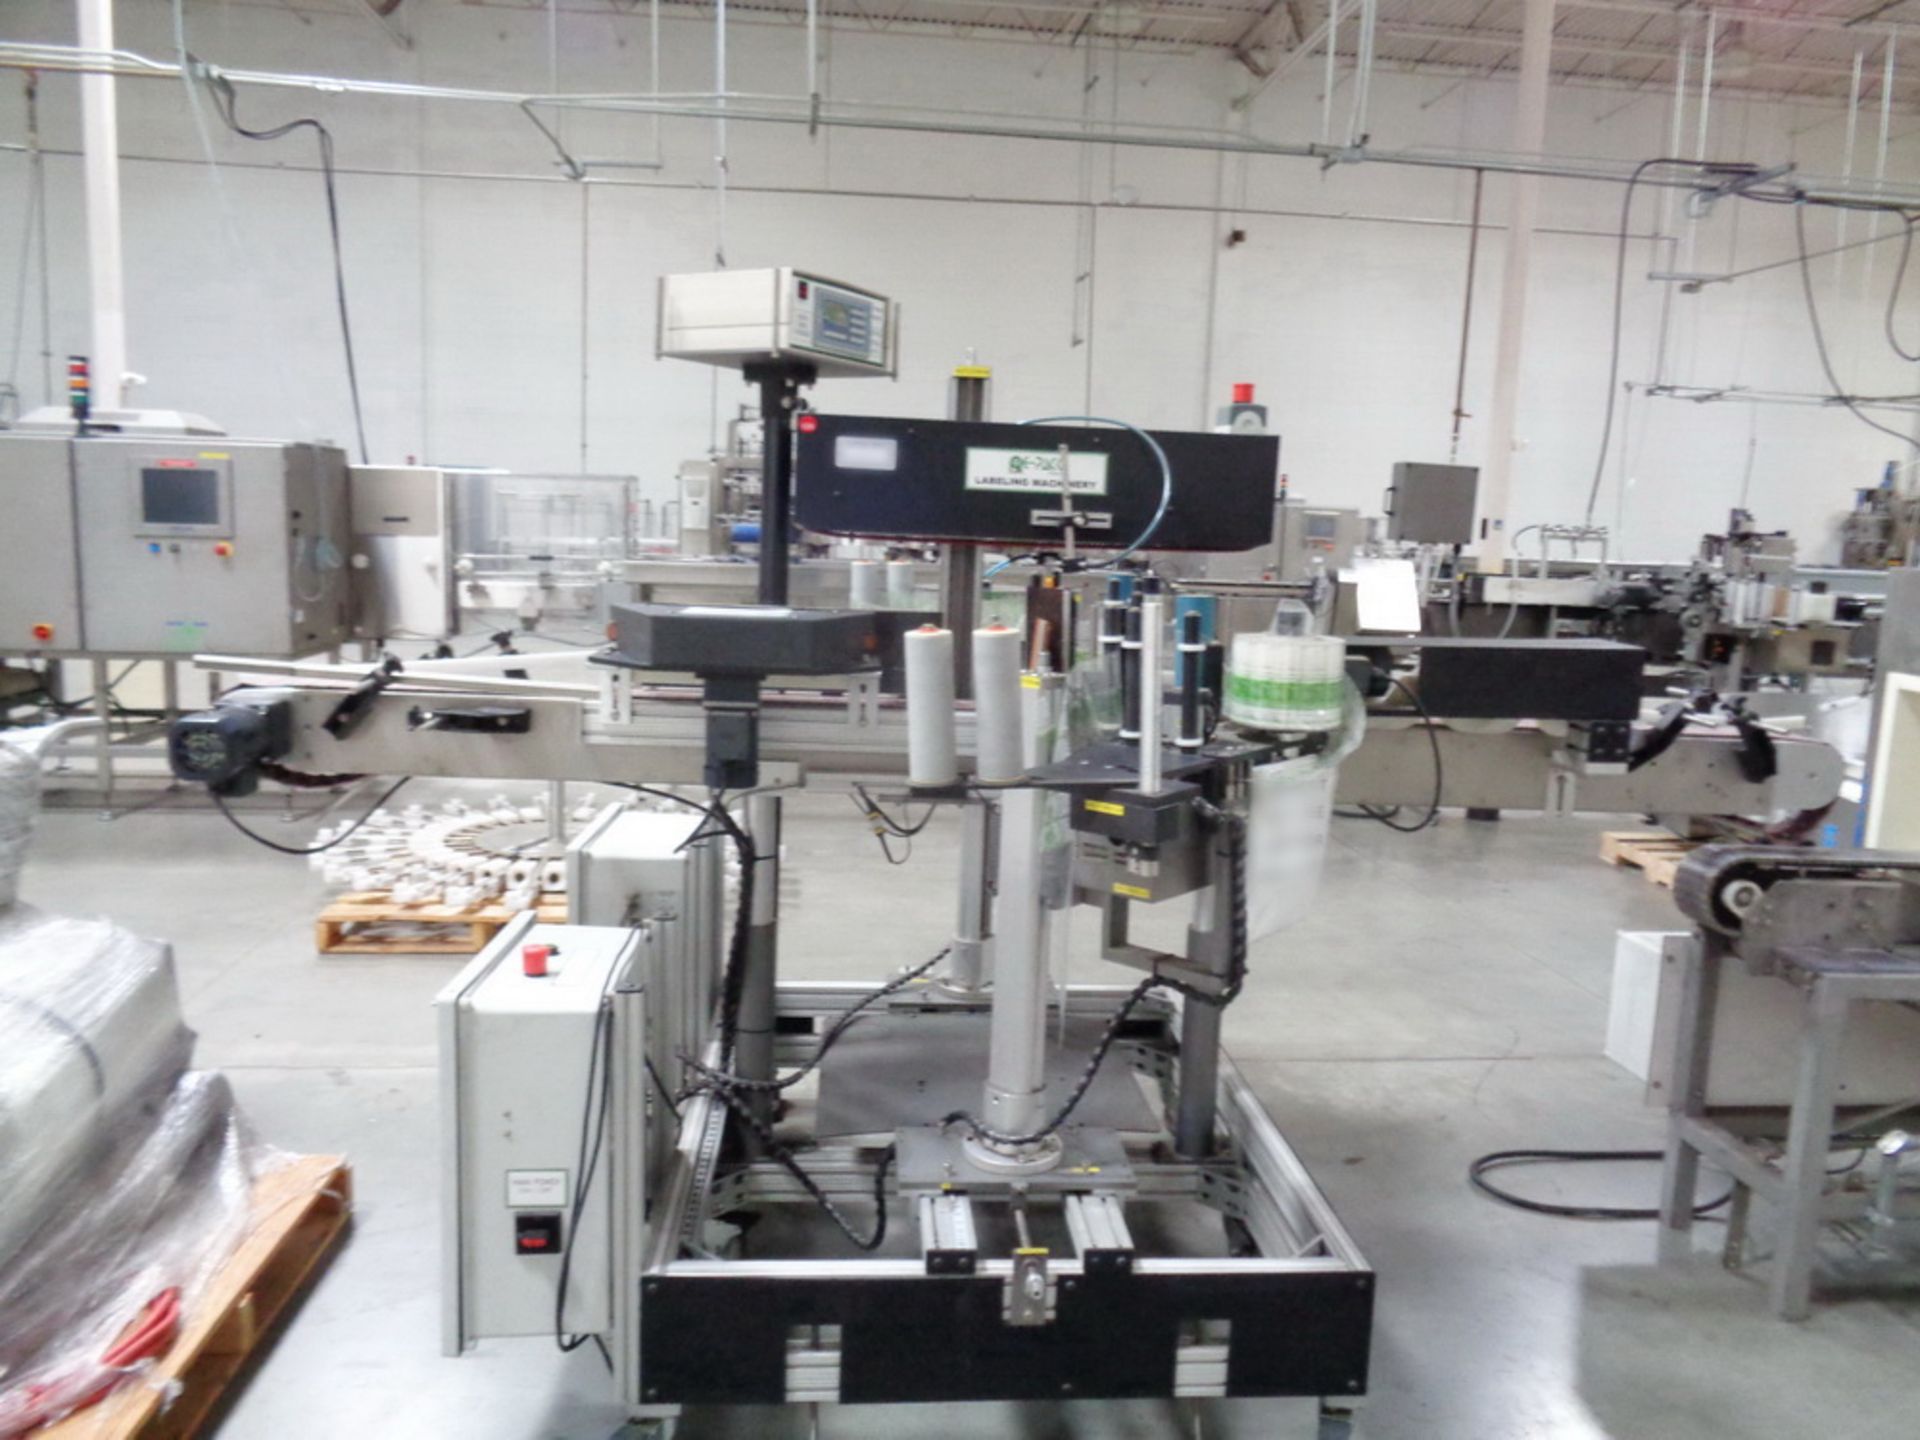 PE-Pack Double Sided Pressure Sensitive Wrap Labeler with conveyor.